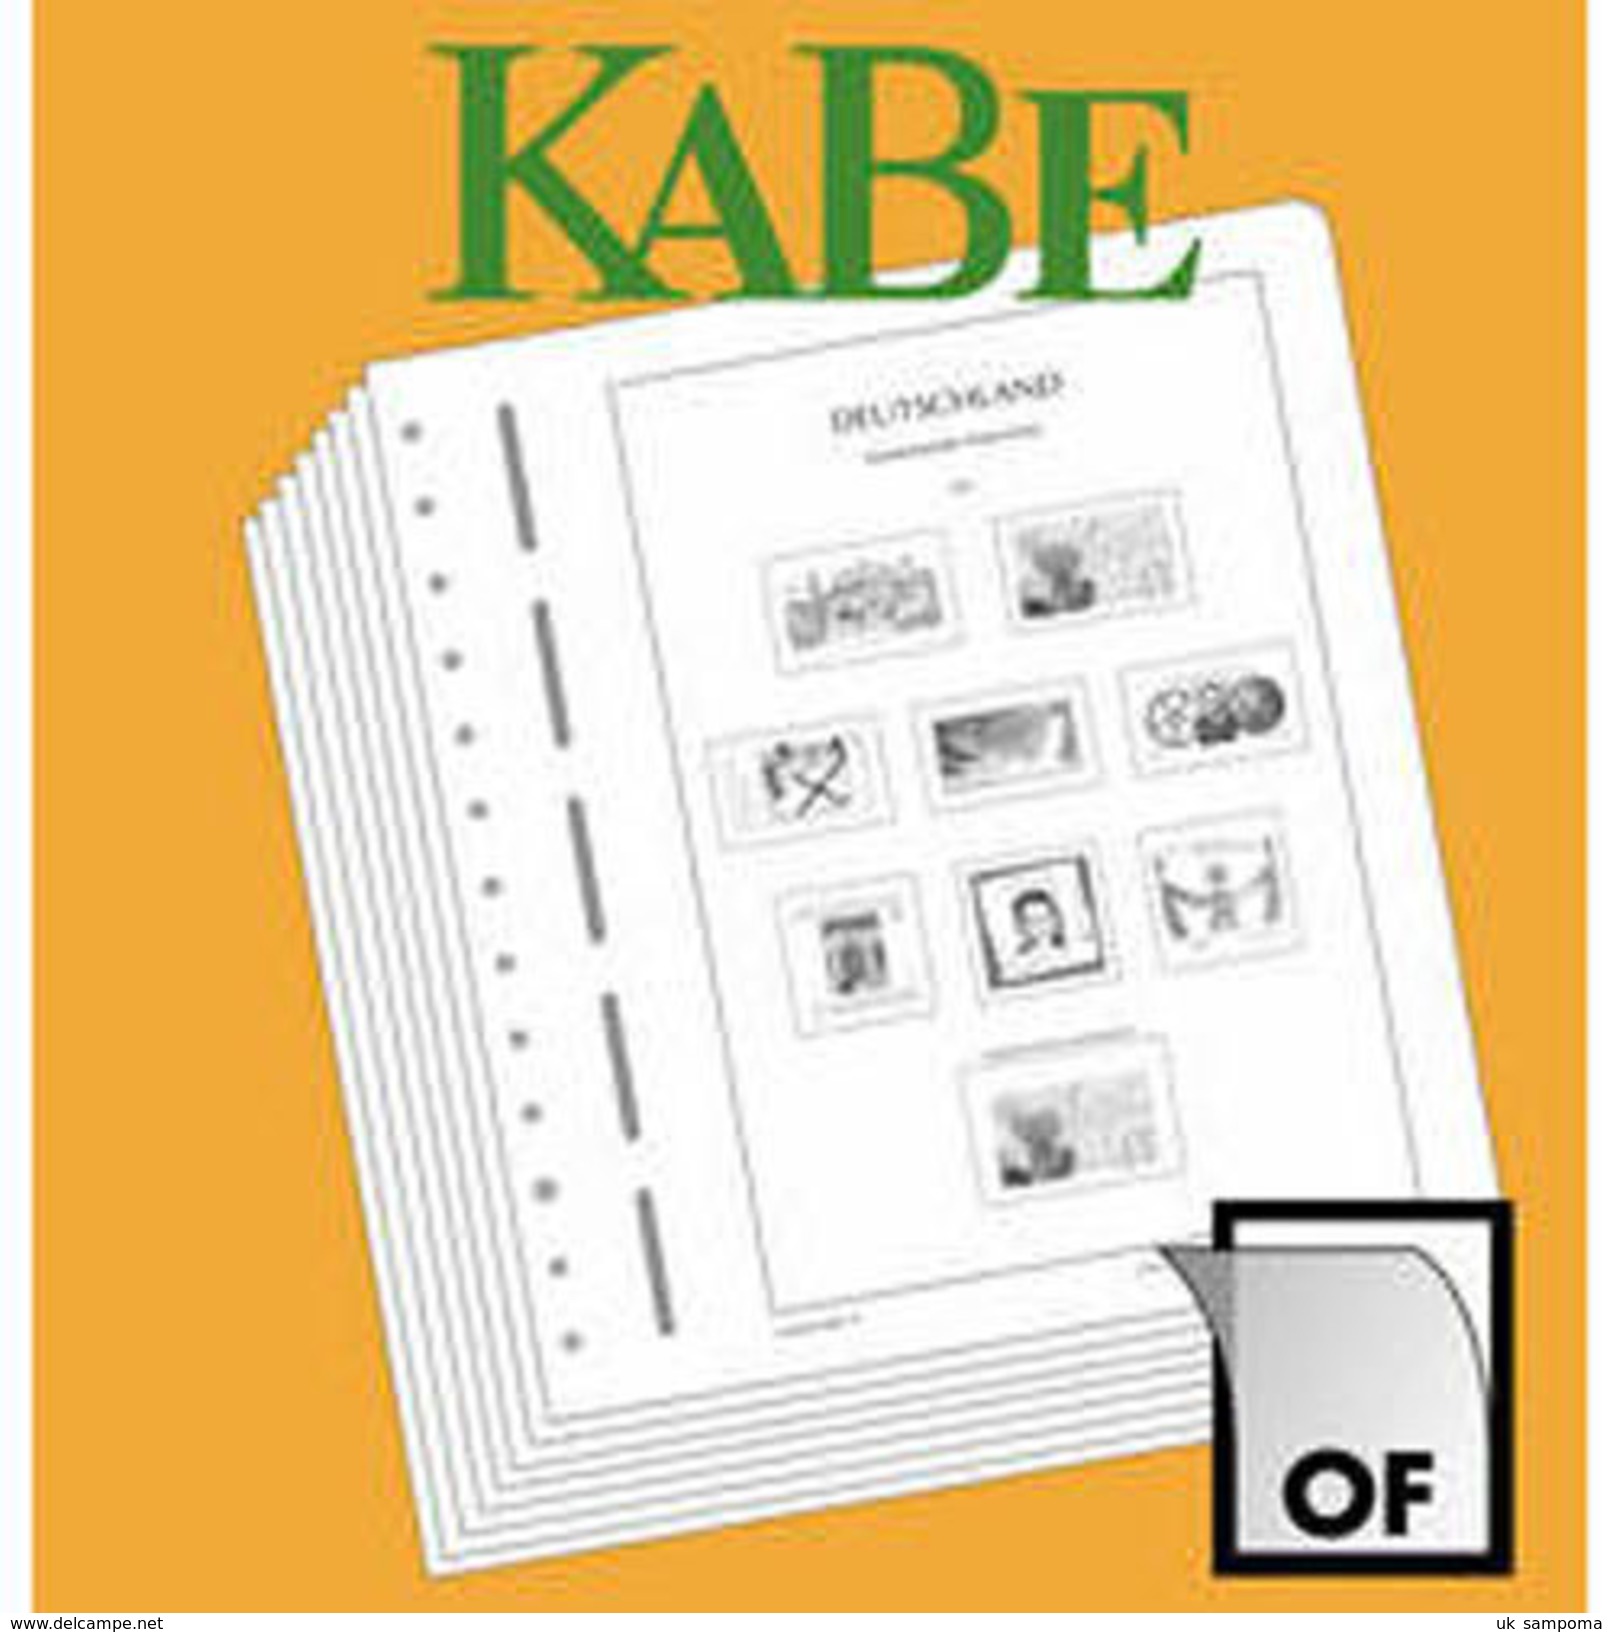 KABE OF Supplement Federal Republic Of Germany Stamp Booklets 2017 - Pre-printed Pages